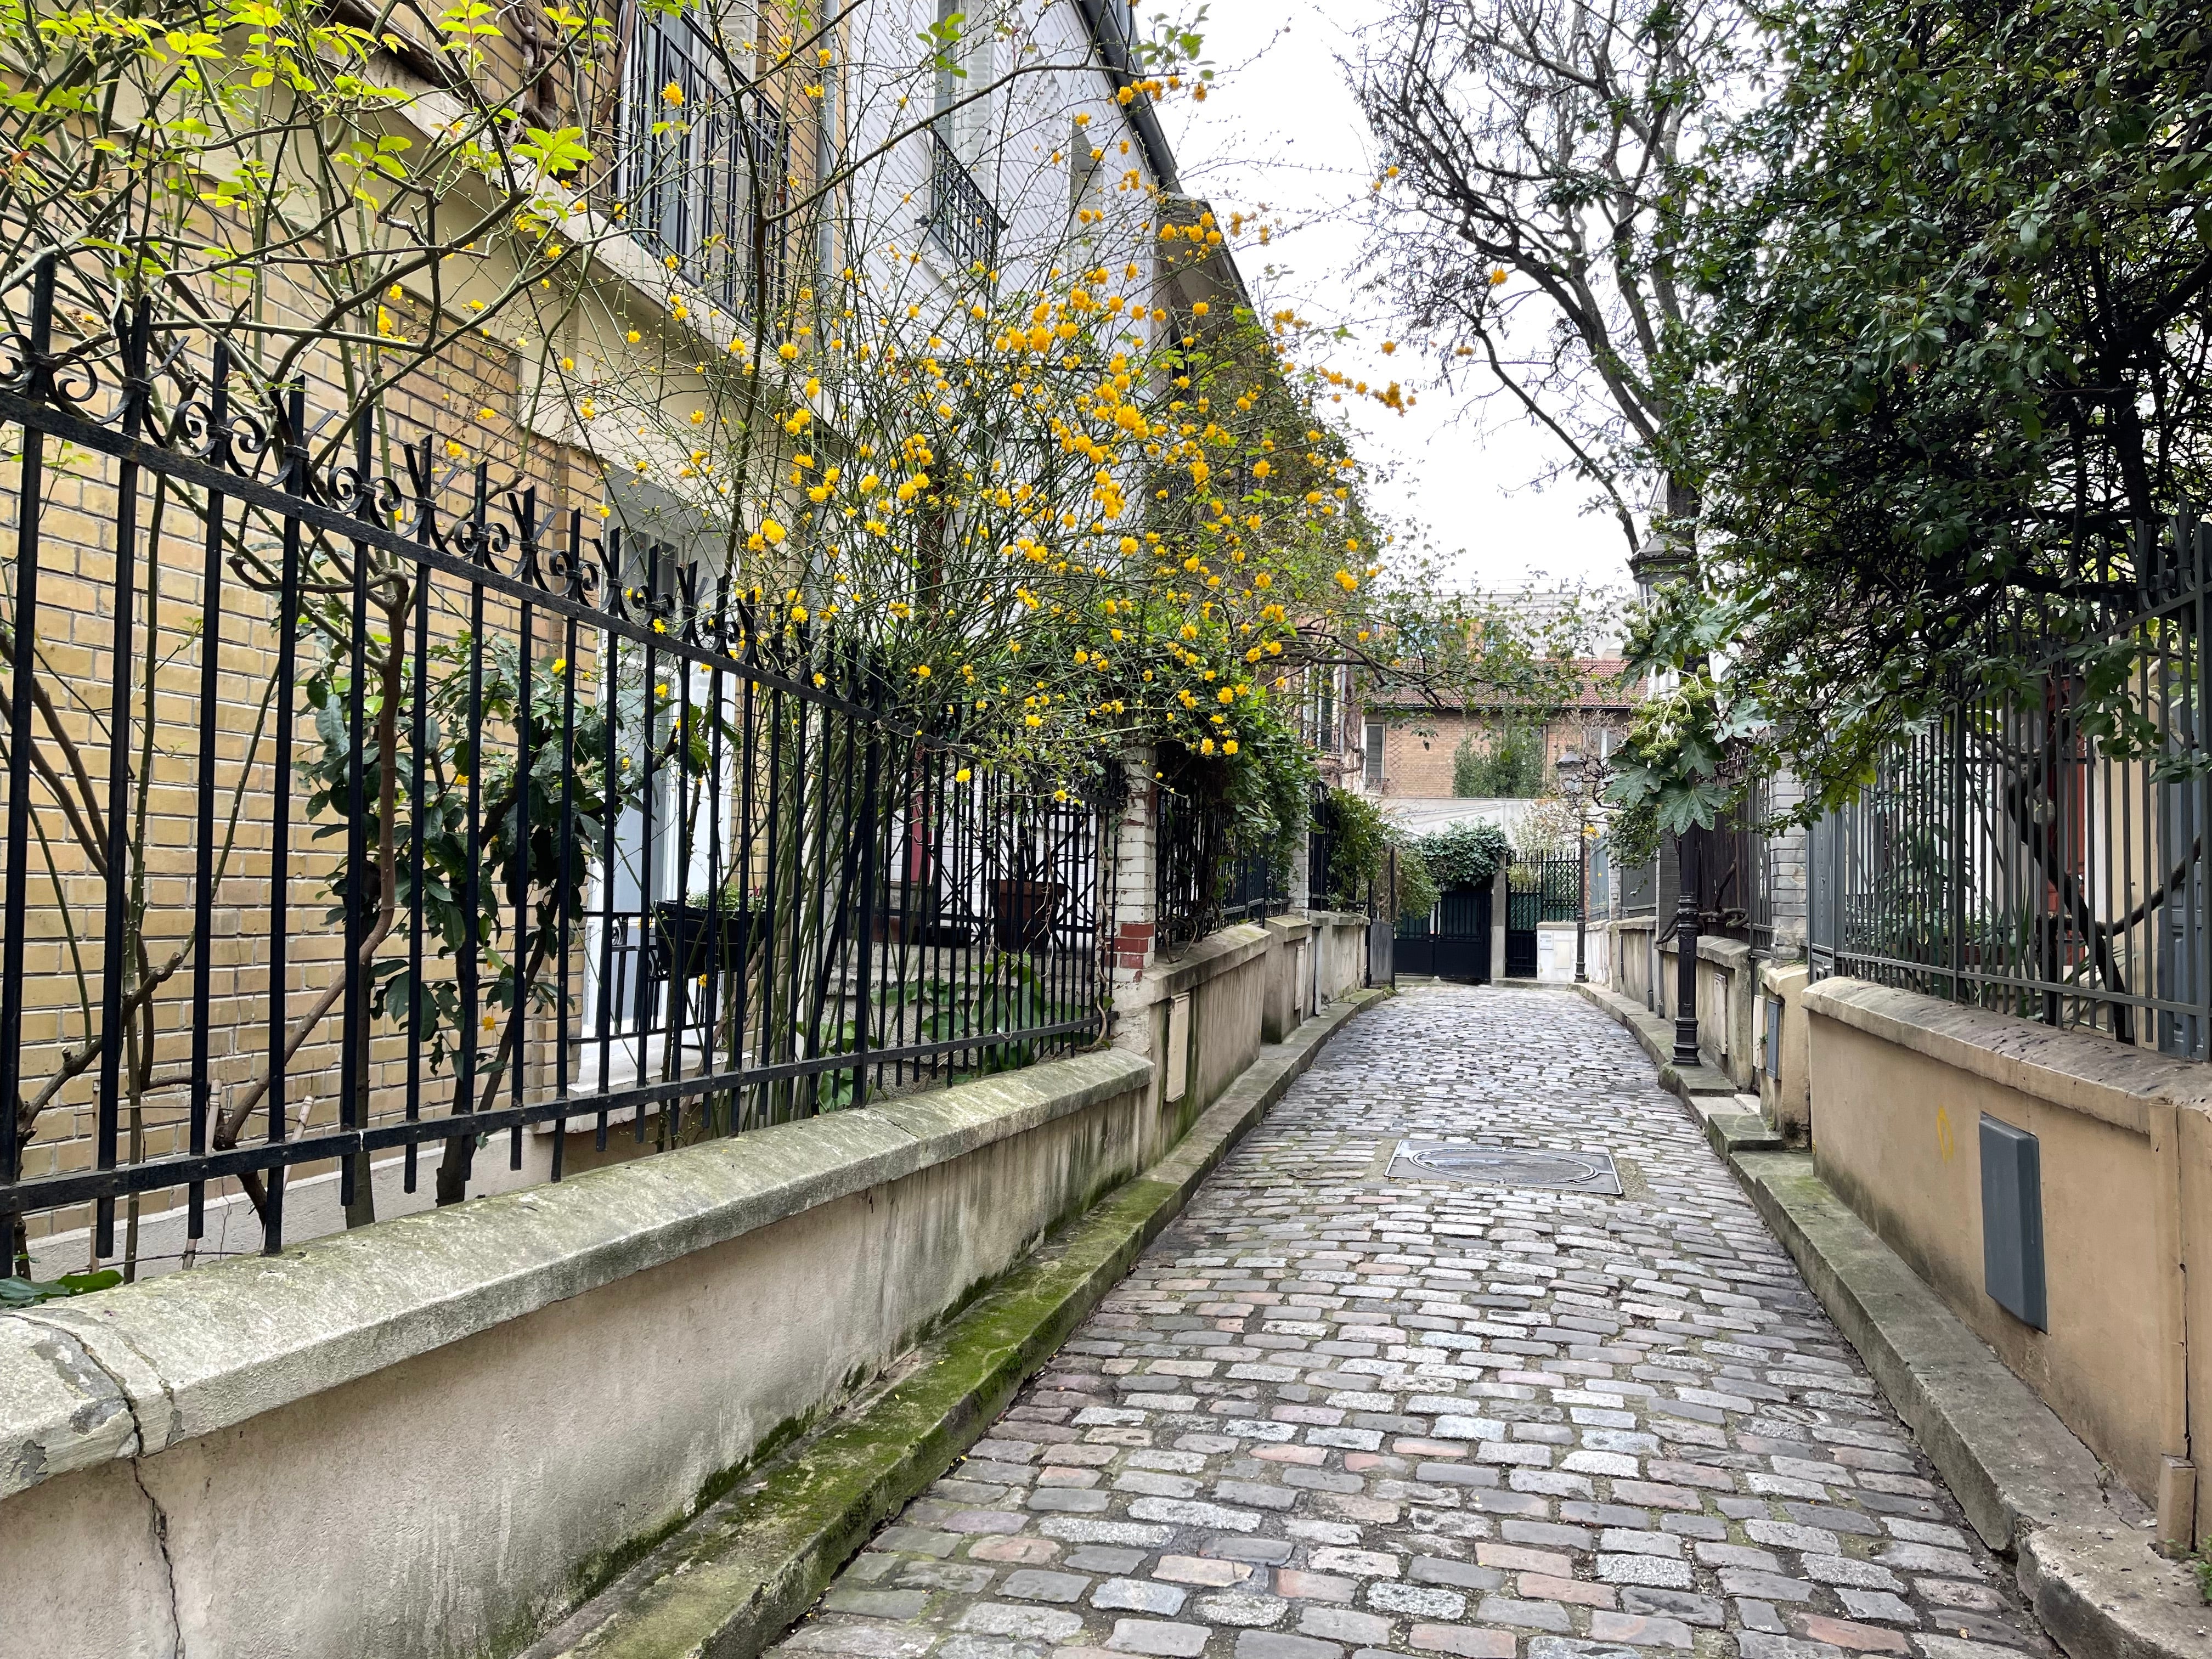 The hidden residences in Square des Peupliers